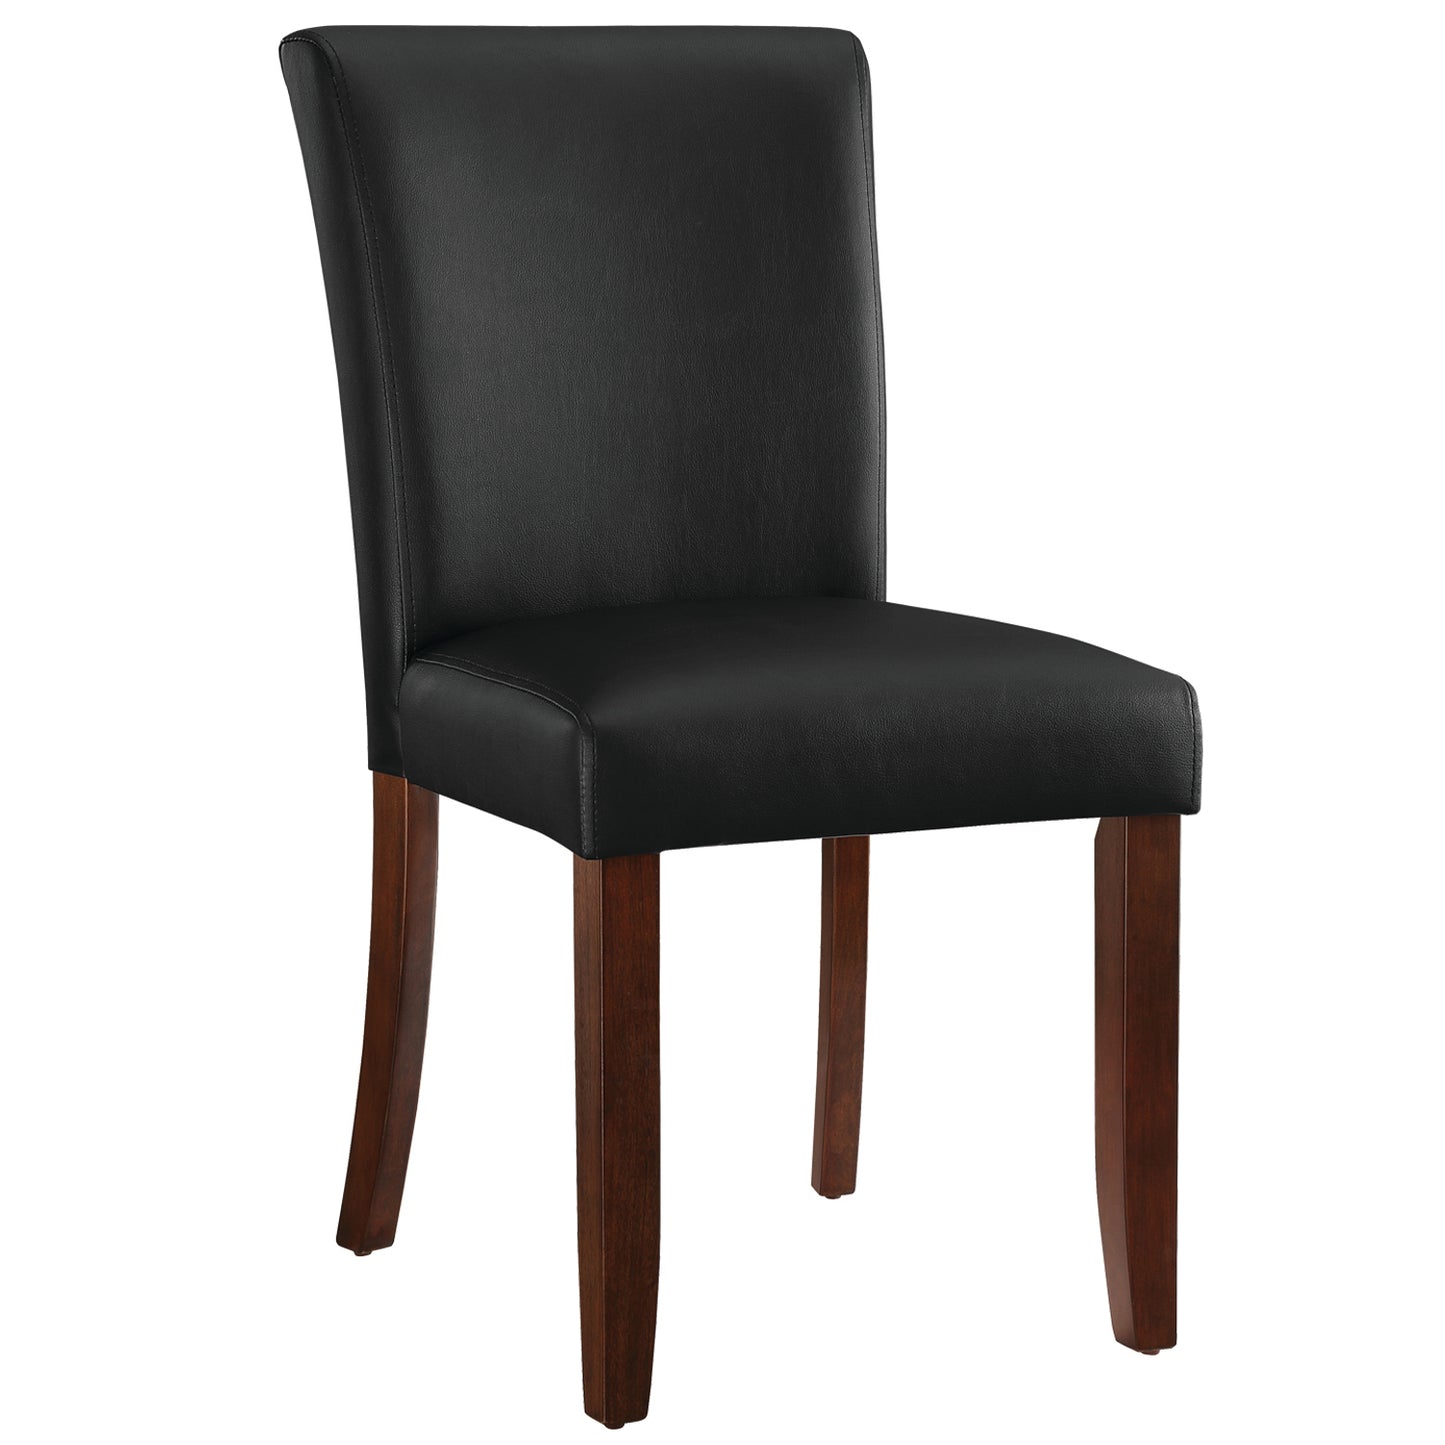 Padded vinyl dining chair in a cappuccino finish.